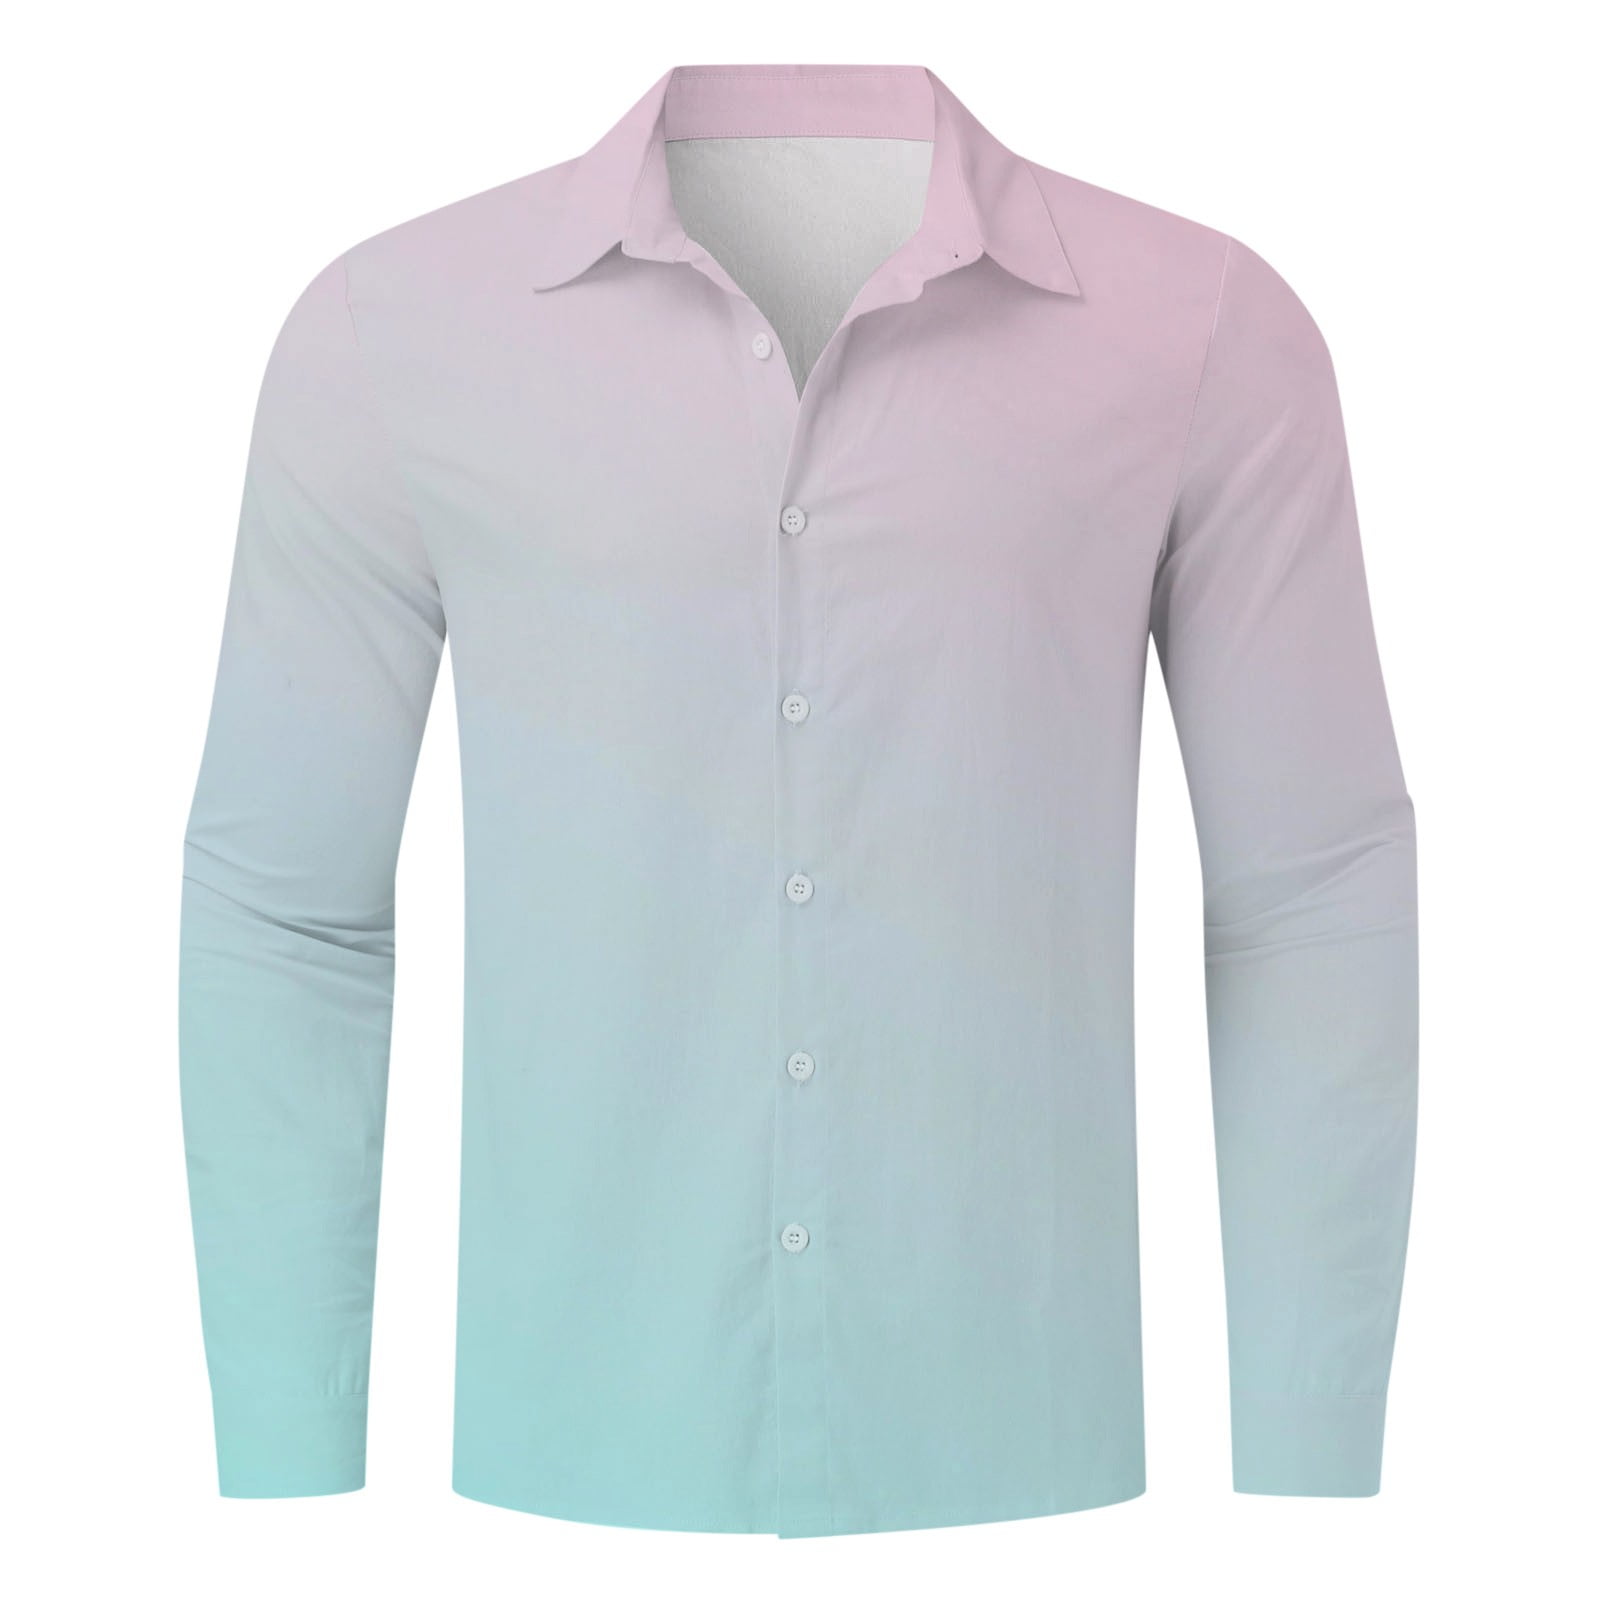 fvwitlyh White Shirt Men's Breathable Quick Dry UV Protection Solid  Convertible Long Sleeve Shirt